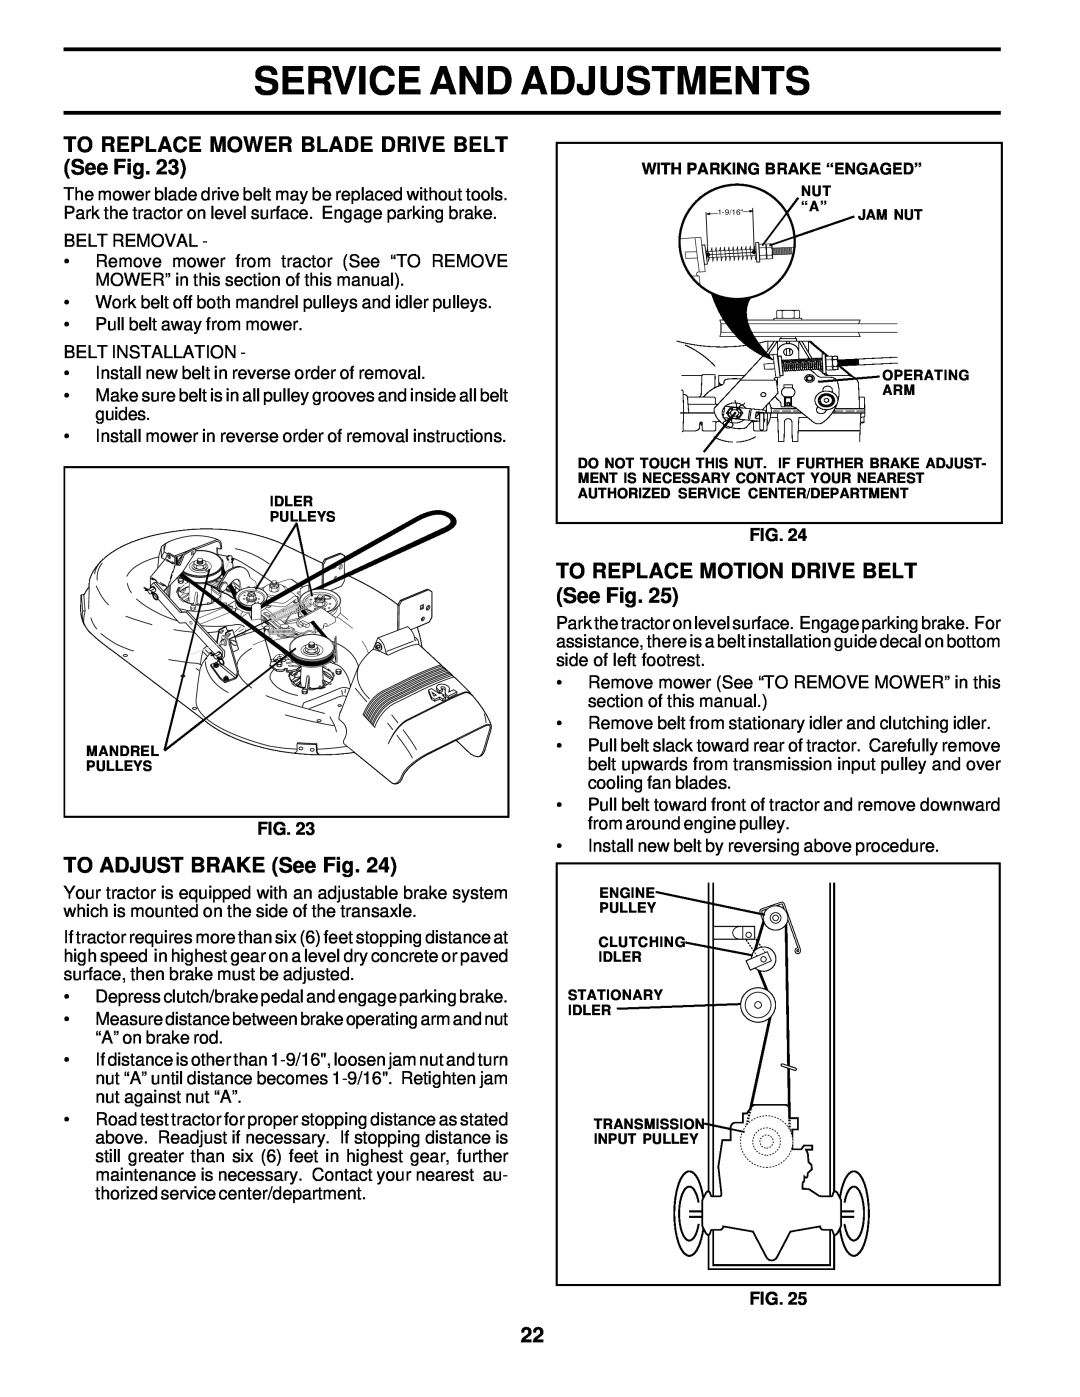 Poulan 178087 TO REPLACE MOWER BLADE DRIVE BELT See Fig, TO ADJUST BRAKE See Fig, TO REPLACE MOTION DRIVE BELT See Fig 